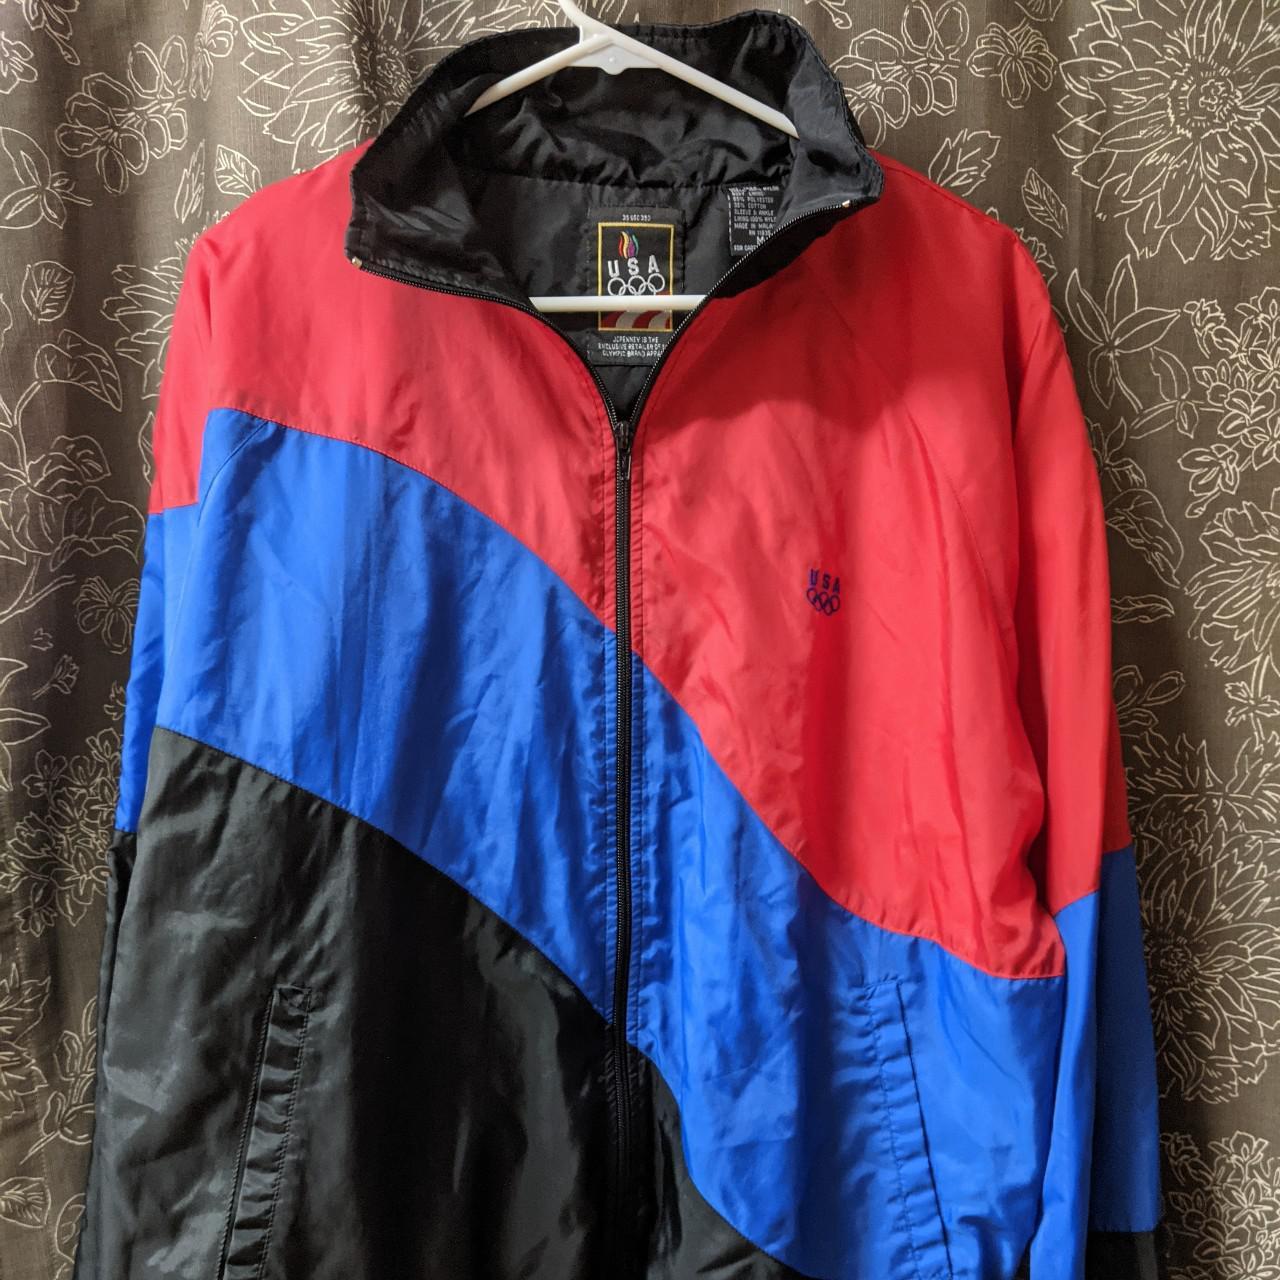 JCPenney Men's Red and Blue Jacket | Depop